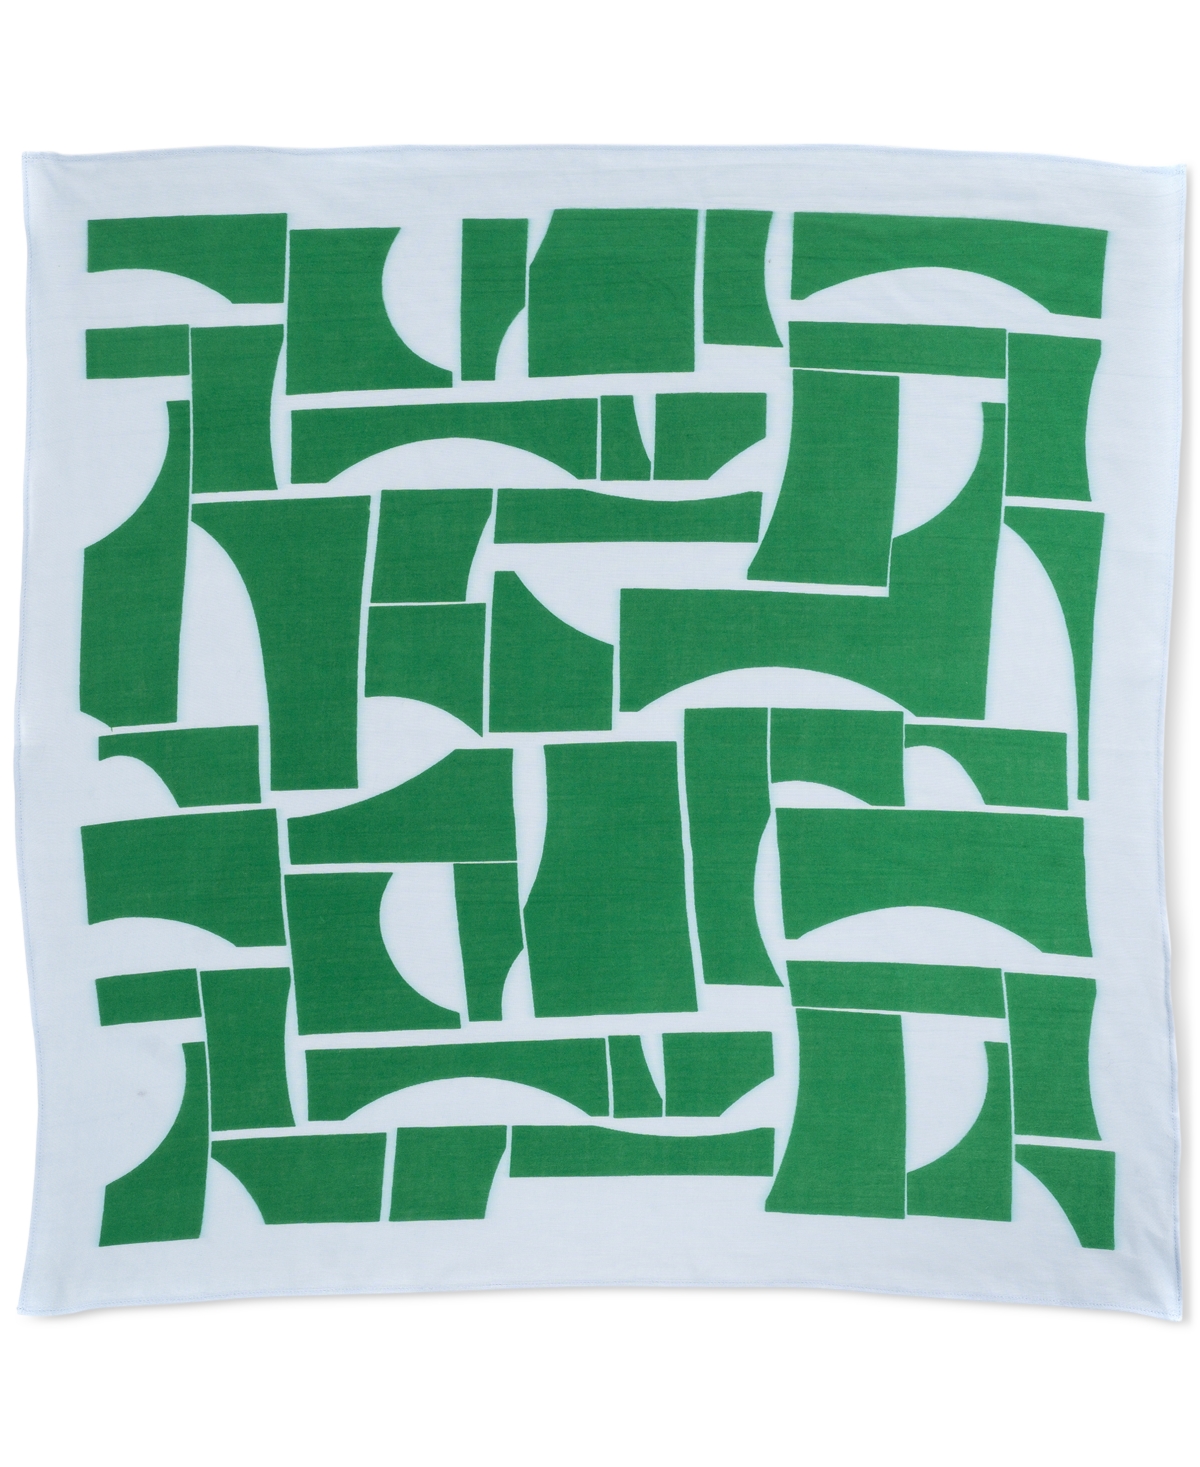 On 34th Women's Abstract Geo Square Scarf, Created For Macy's In Green Blue